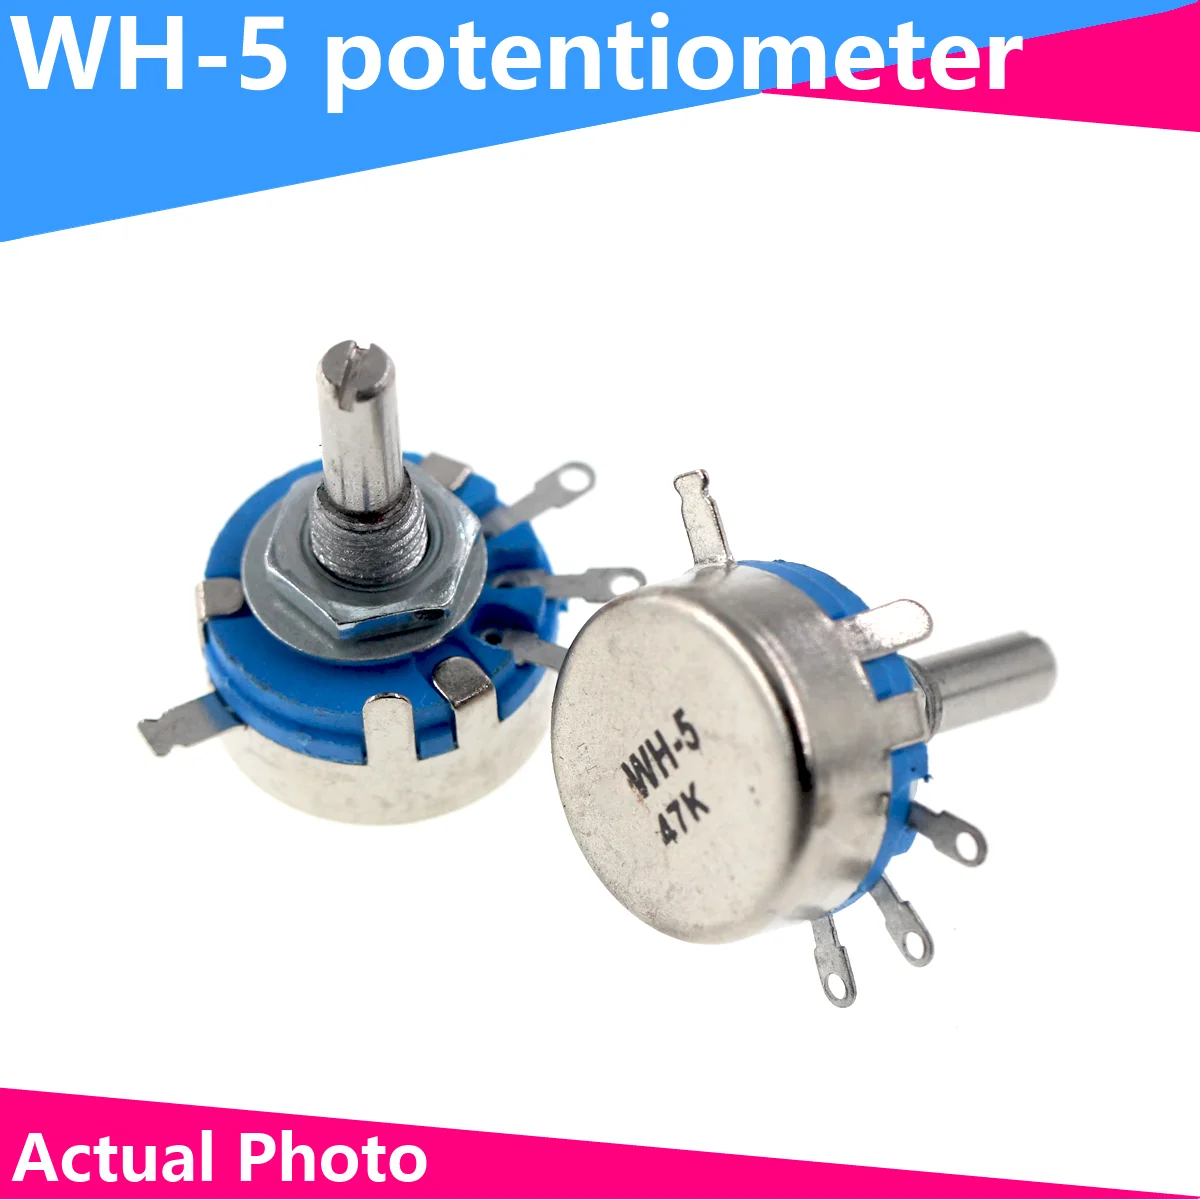 2PCS WH5-1A 470R 1K 10K 47K 4K7 100K 470K 220K 1K5 22K 1M ohm 3-Terminals Round Shaft Rotary Taper Carbon Potentiometer WH5 wh5 1a carbon potentiometer 1k 2k 10k 47k 4k7 470r 100k 470k 220k 1k5 22k 1m ohm 3 terminals round shaft rotary taper wh5